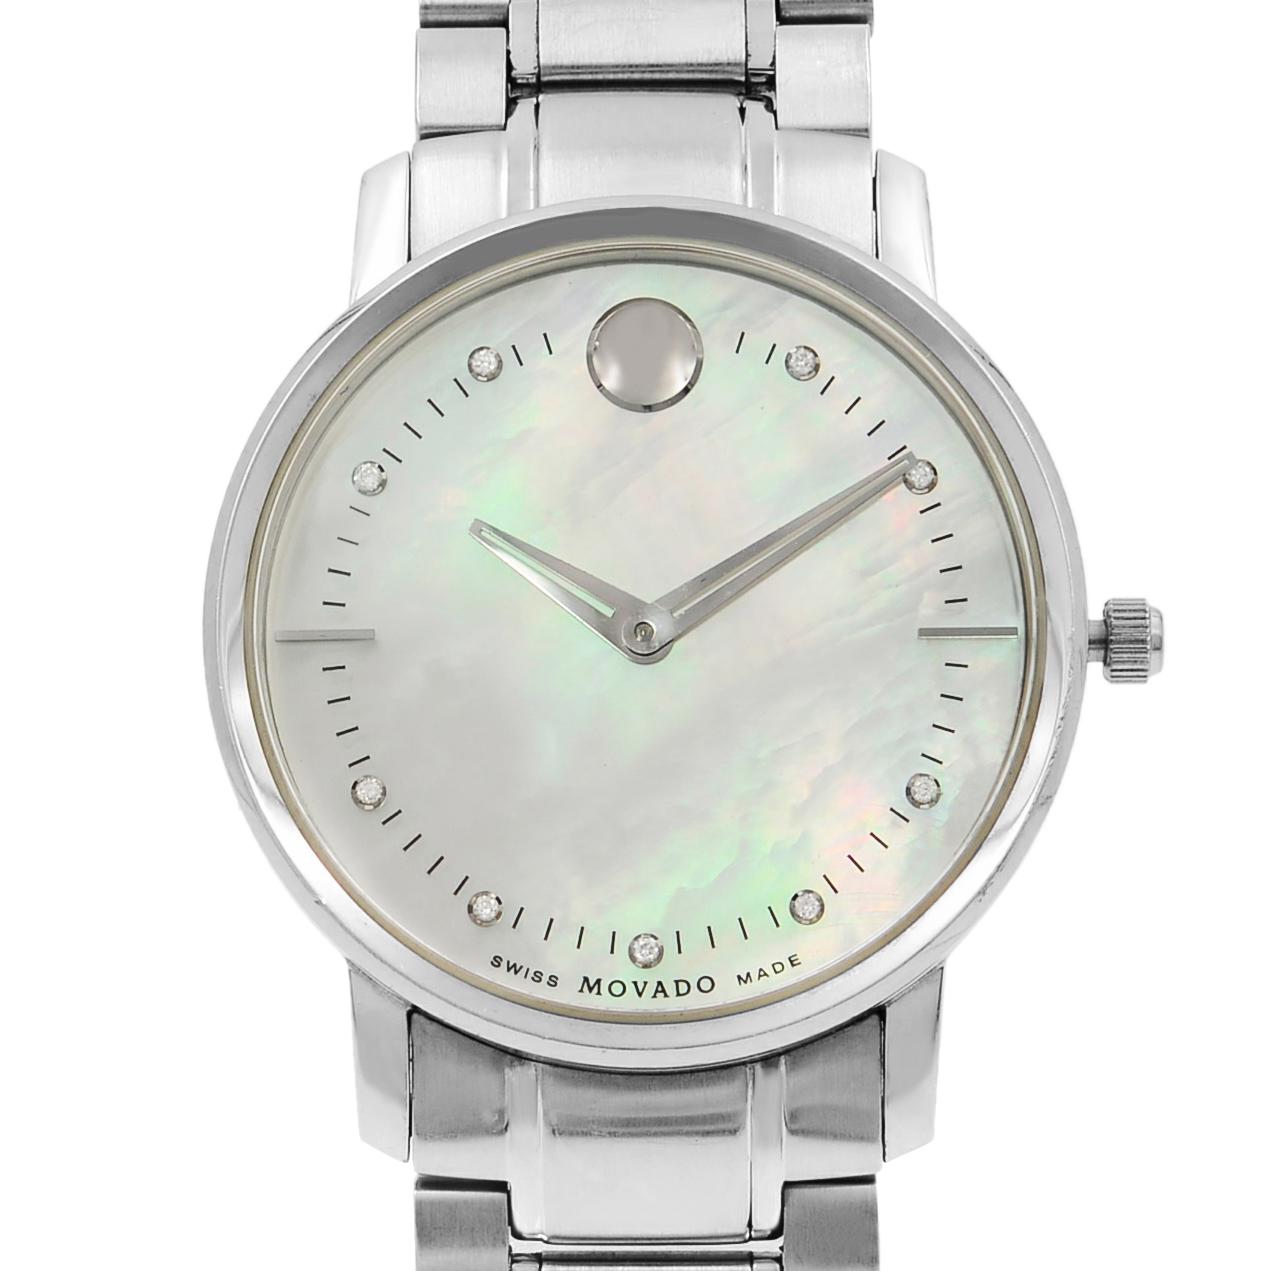 This pre-owned Movado TC 0606691 is a beautiful Ladies timepiece that is powered by a quartz movement which is cased in a stainless steel case. It has a round shape face, diamonds dial and has hand diamonds style markers. It is completed with a